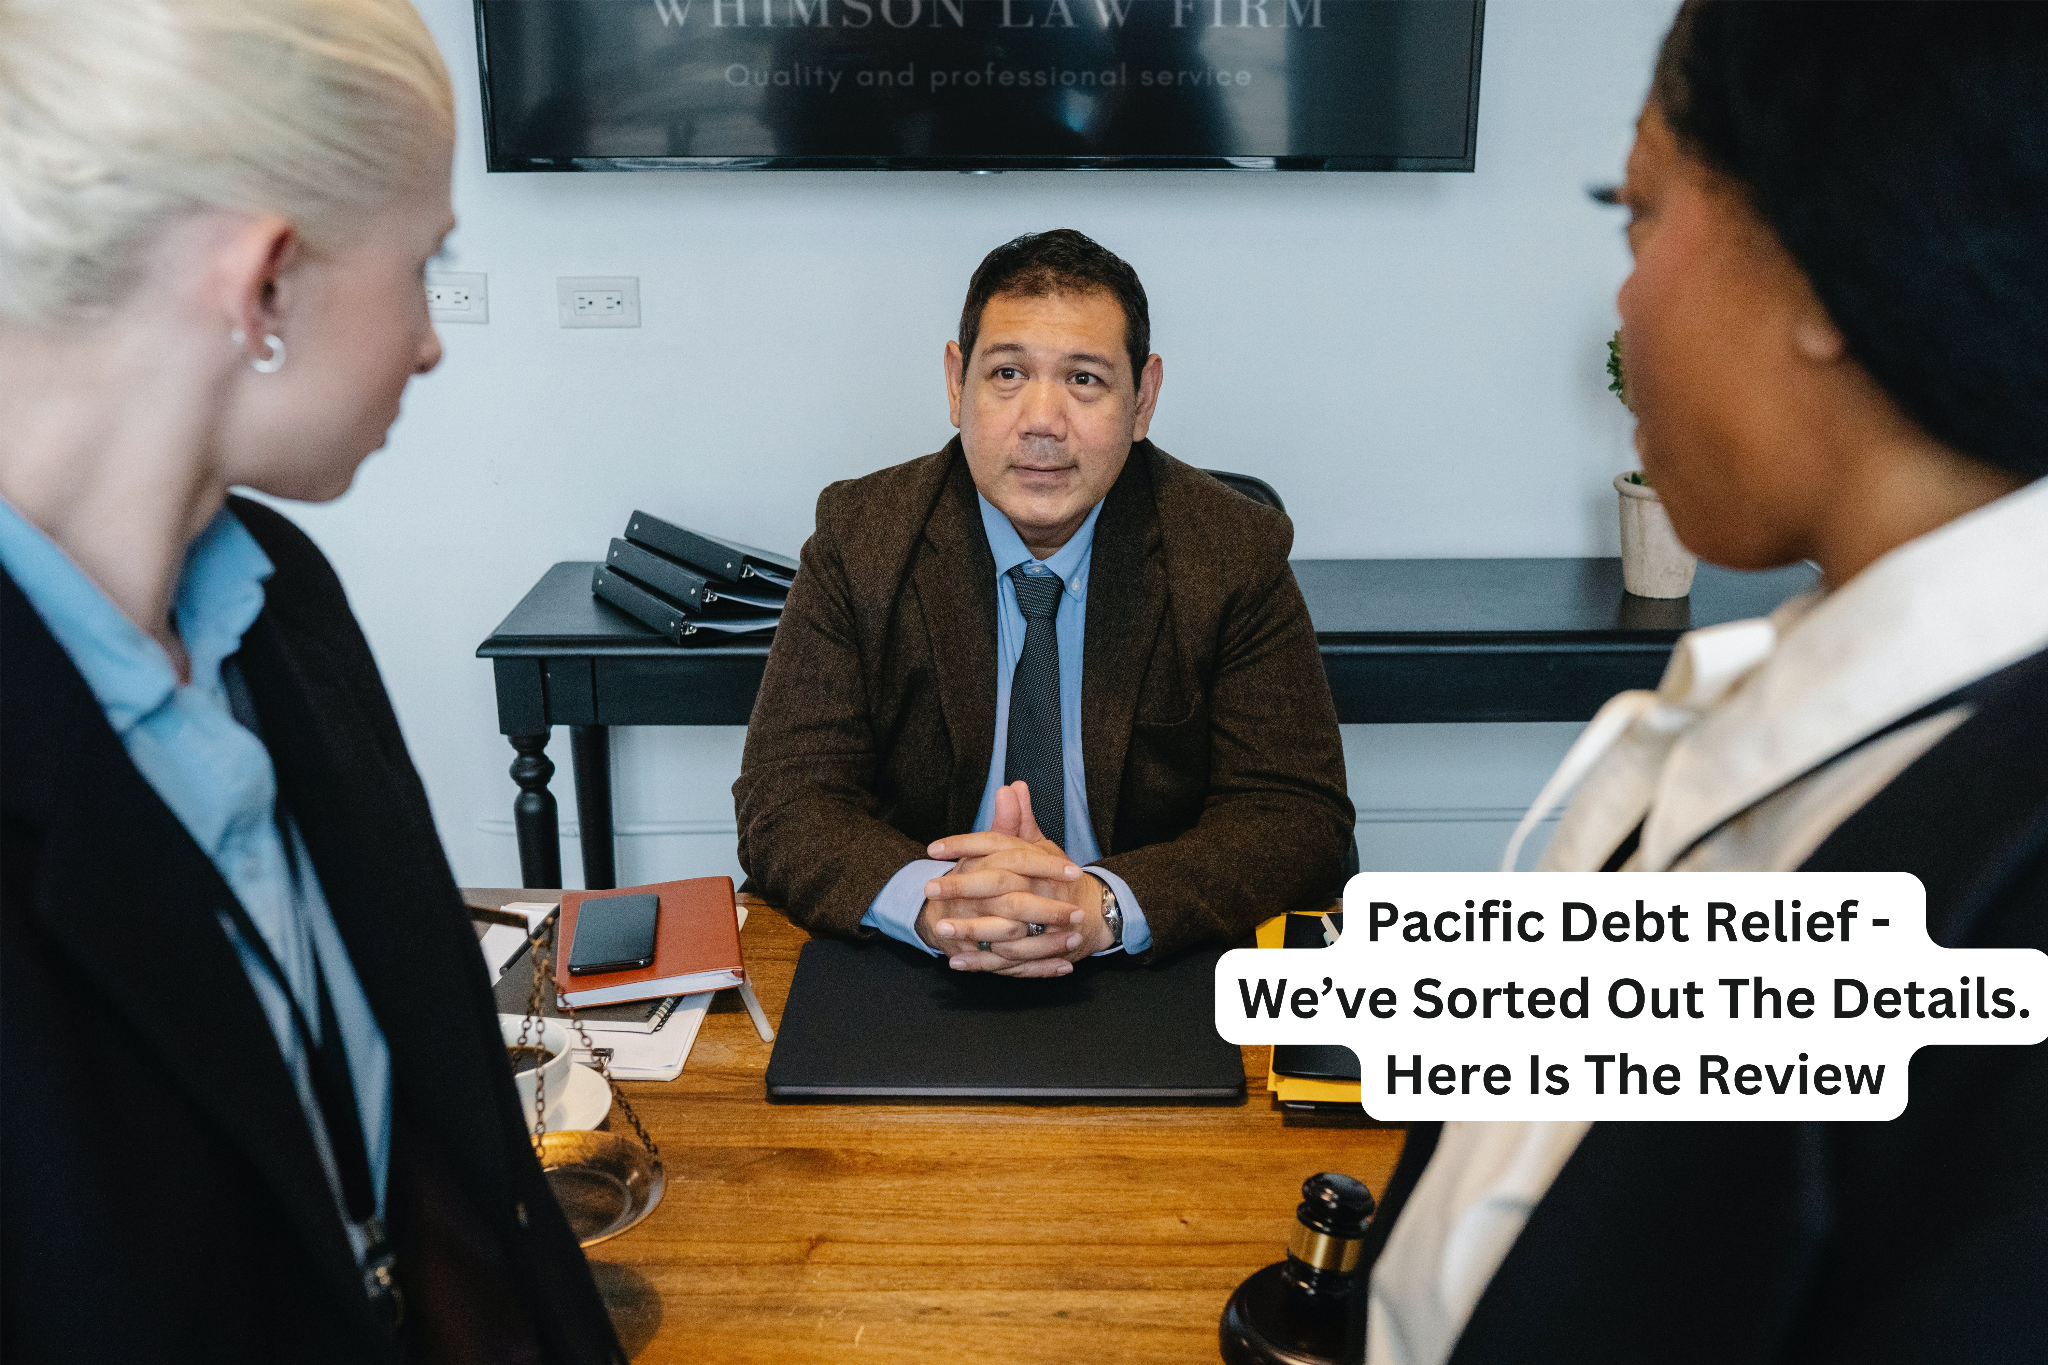 Pacific Debt Relief - We’ve Sorted Out The Details. Here Is The Review